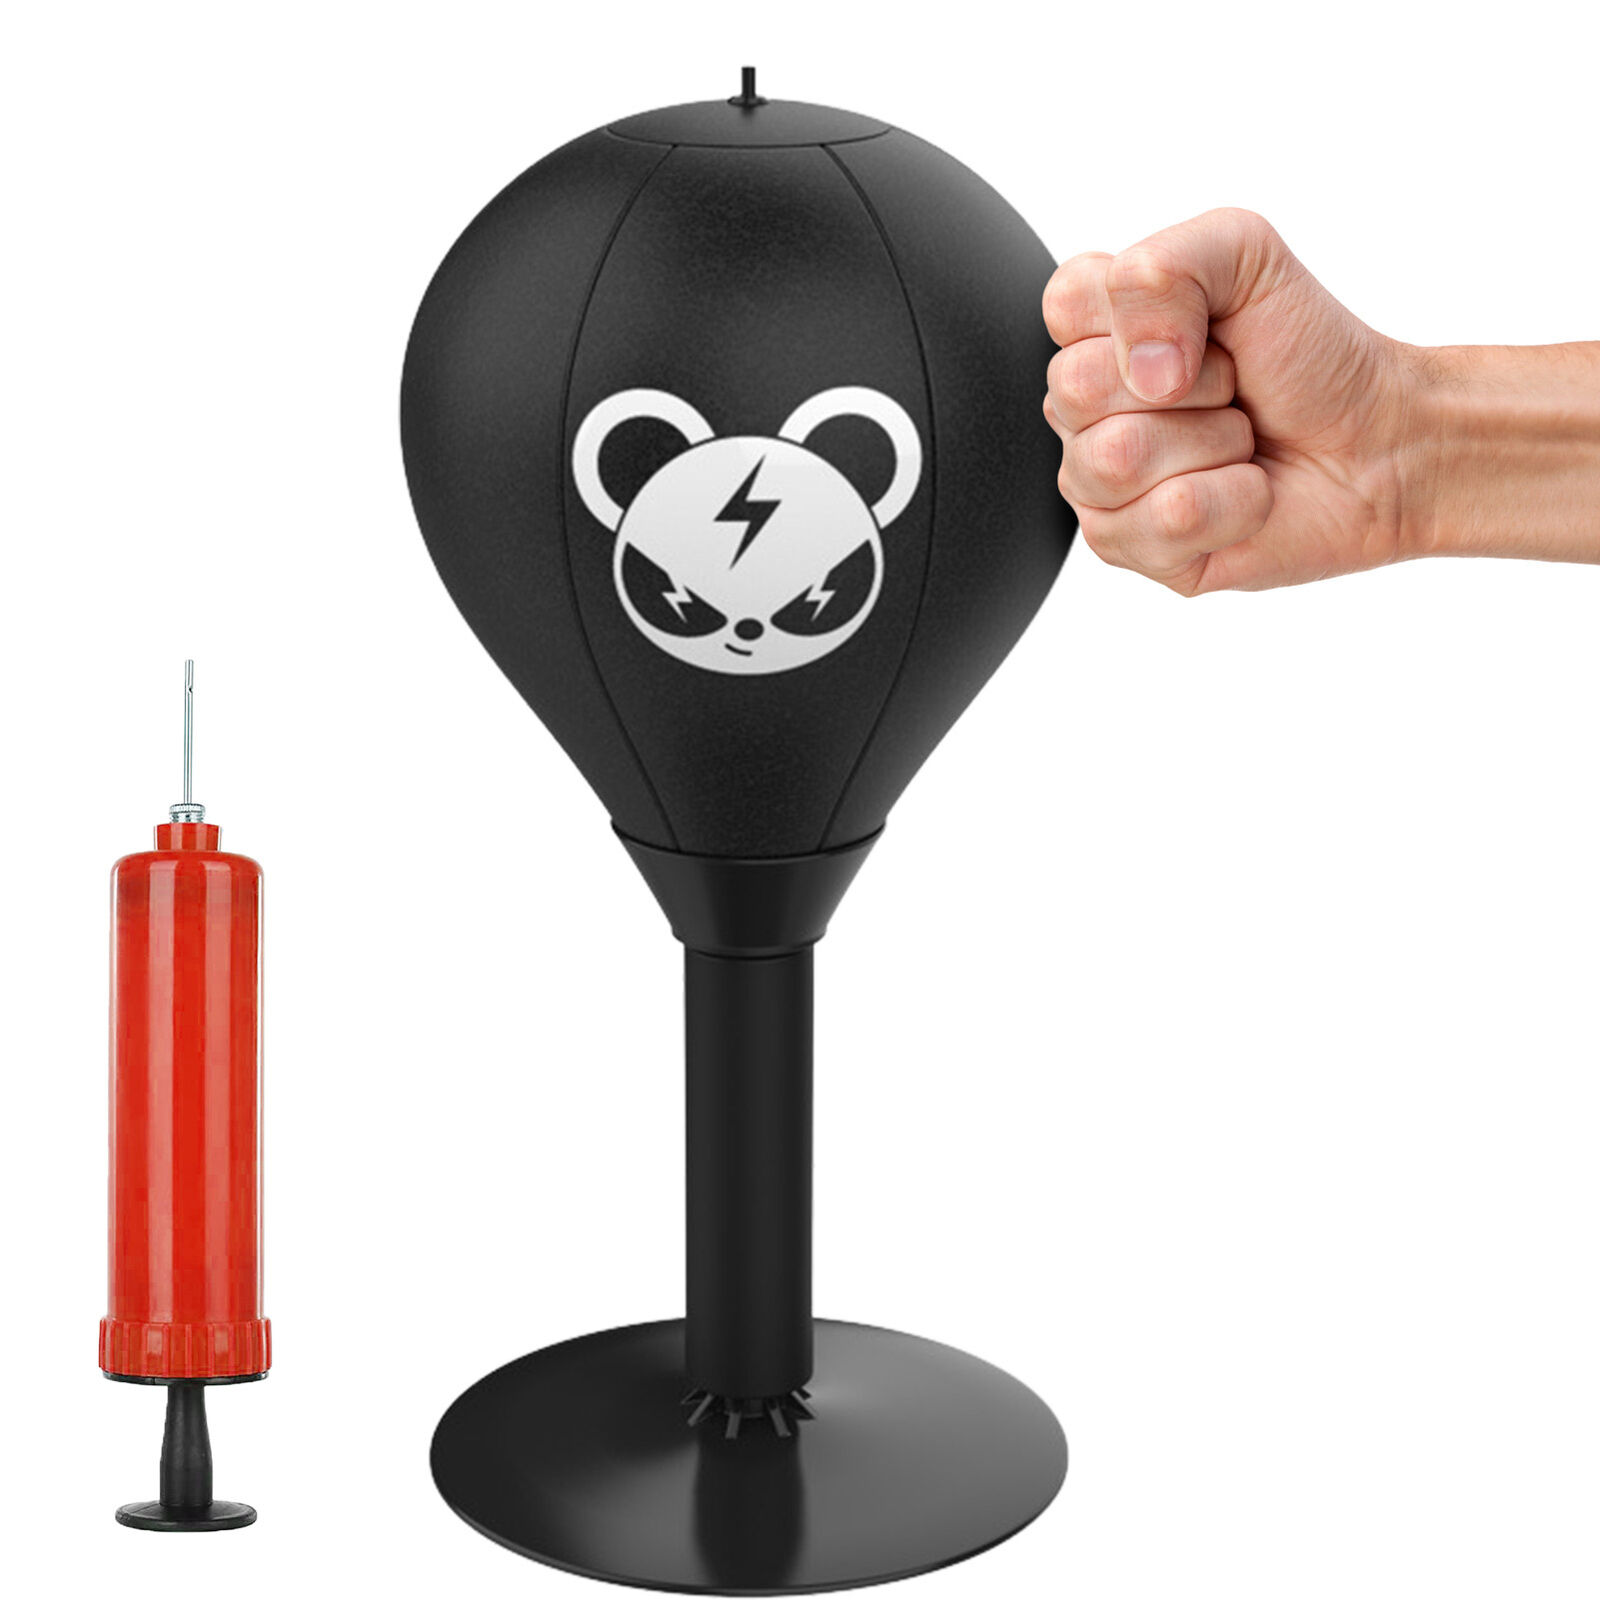 Punching Bag Desktop Punching Bag Stress Buster With Suction Cup Desk Table Boxi